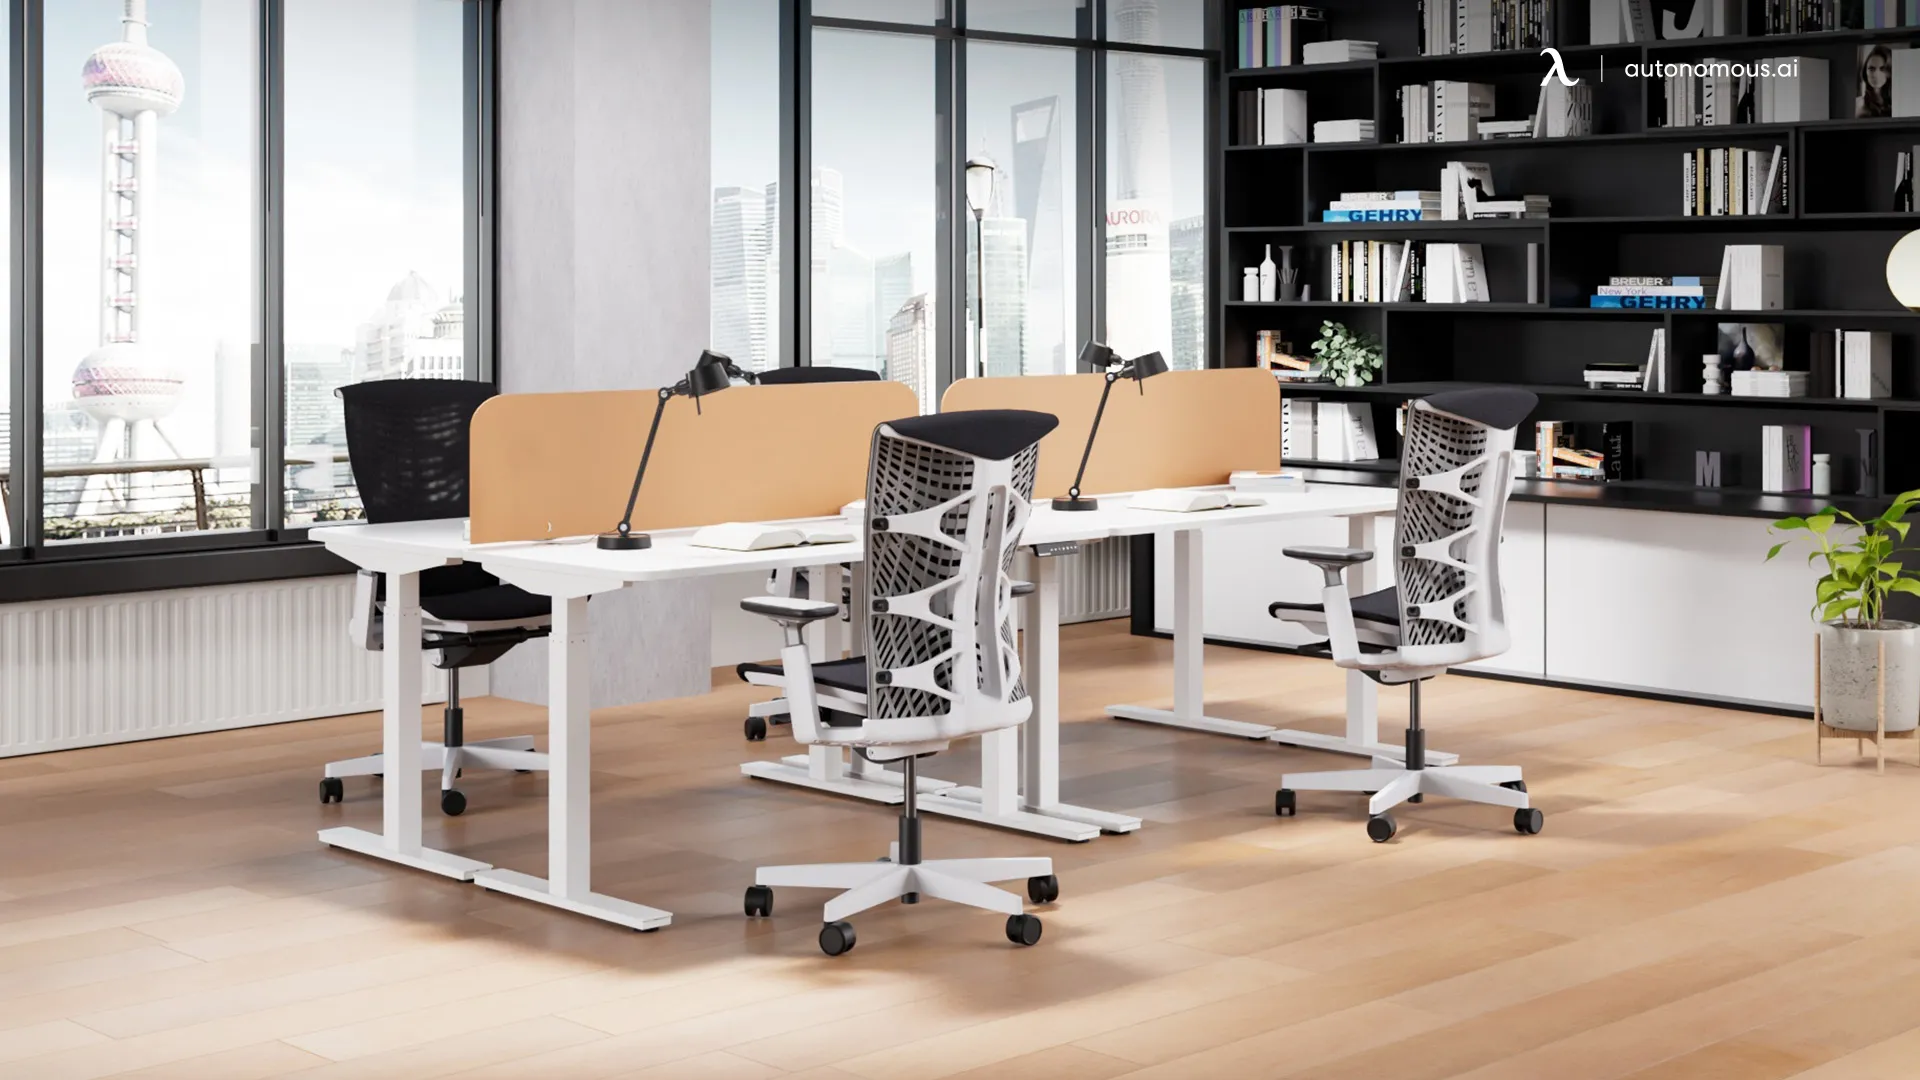 Where Can You Get Modular Office Furniture?